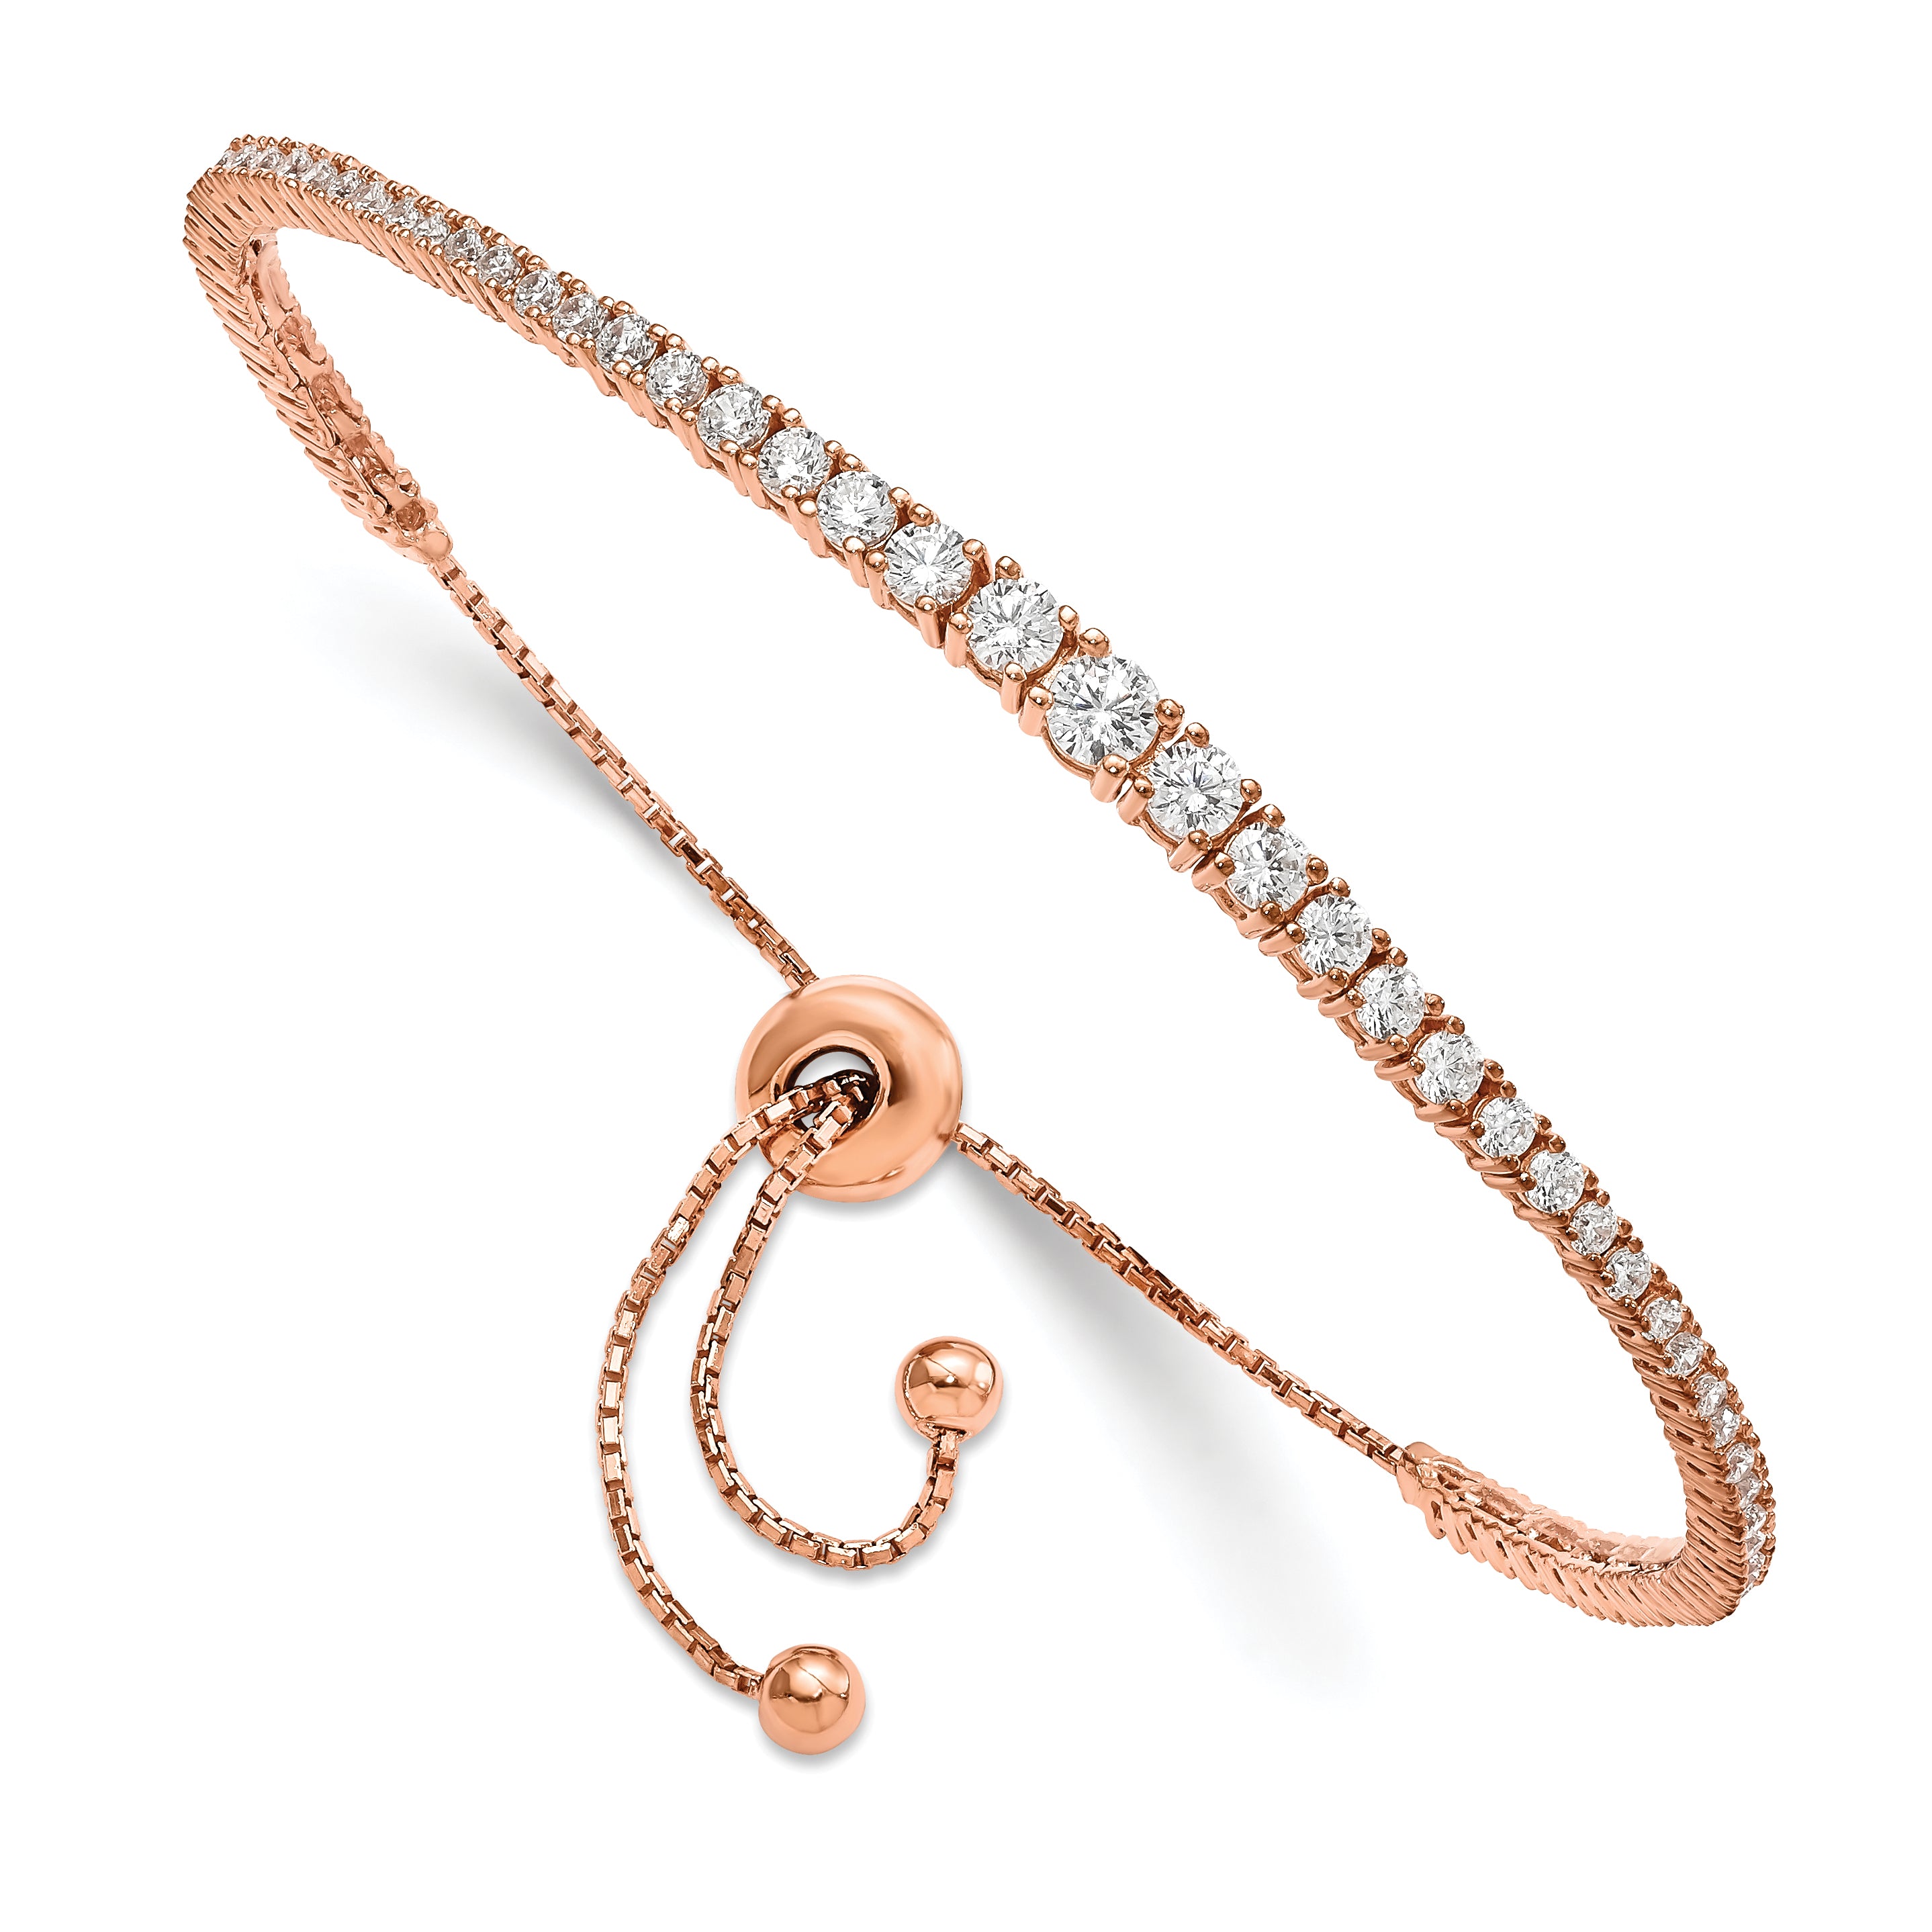 Sterling Shimmer Sterling Silver Rose-tone Flash Rose Gold-plated 67 Stone Graduated CZ Adjustable 5 inch up to 9 inch Bracelet